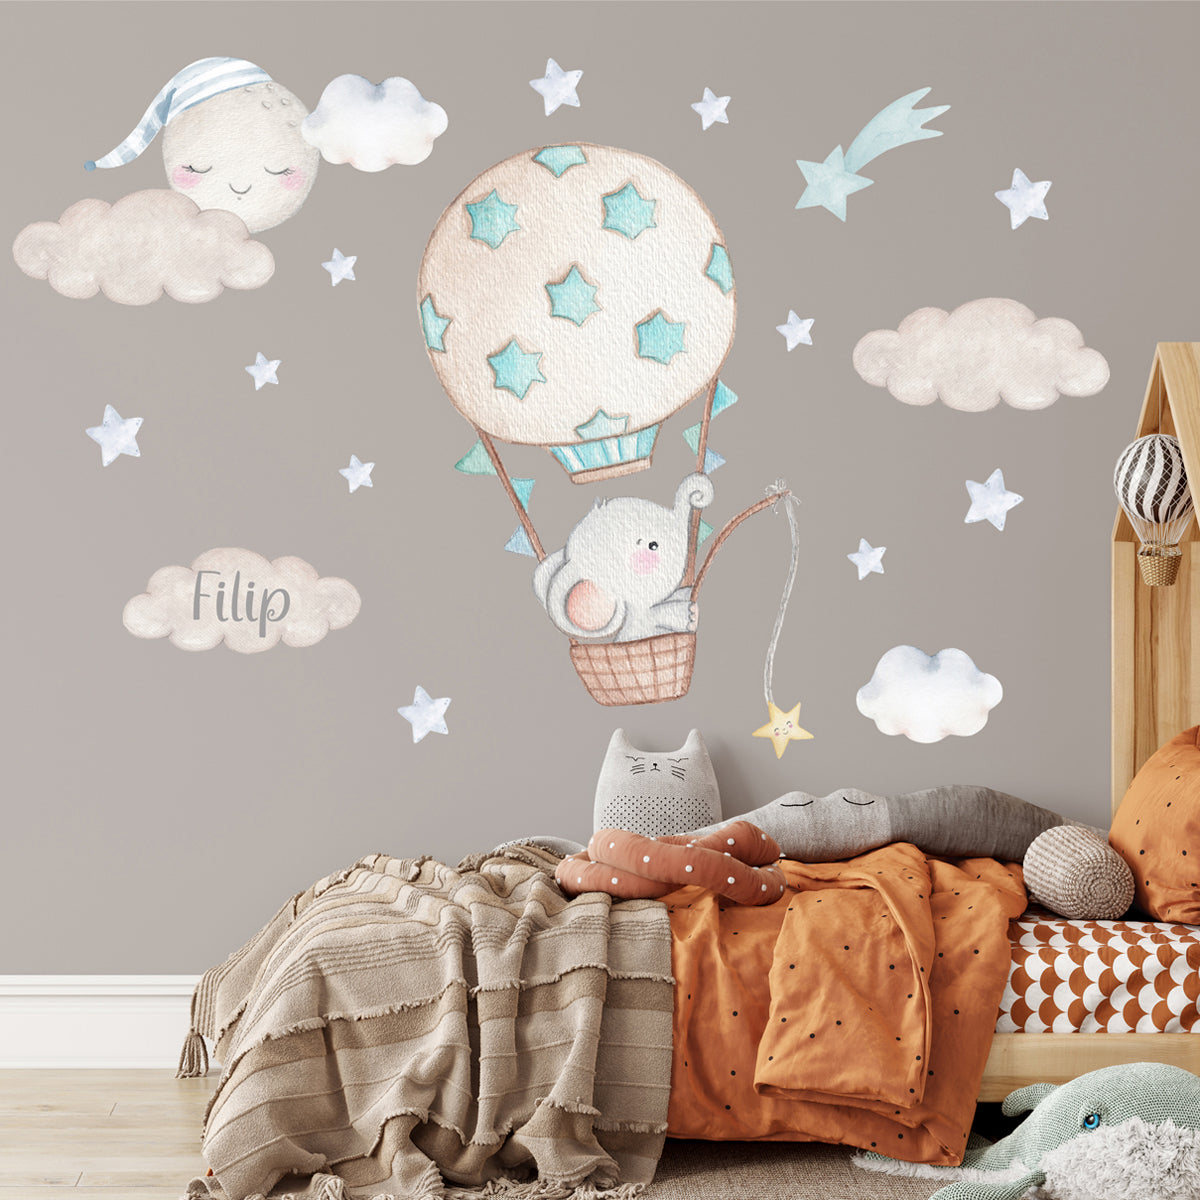 Wall Stickers for Children's Room Balloons